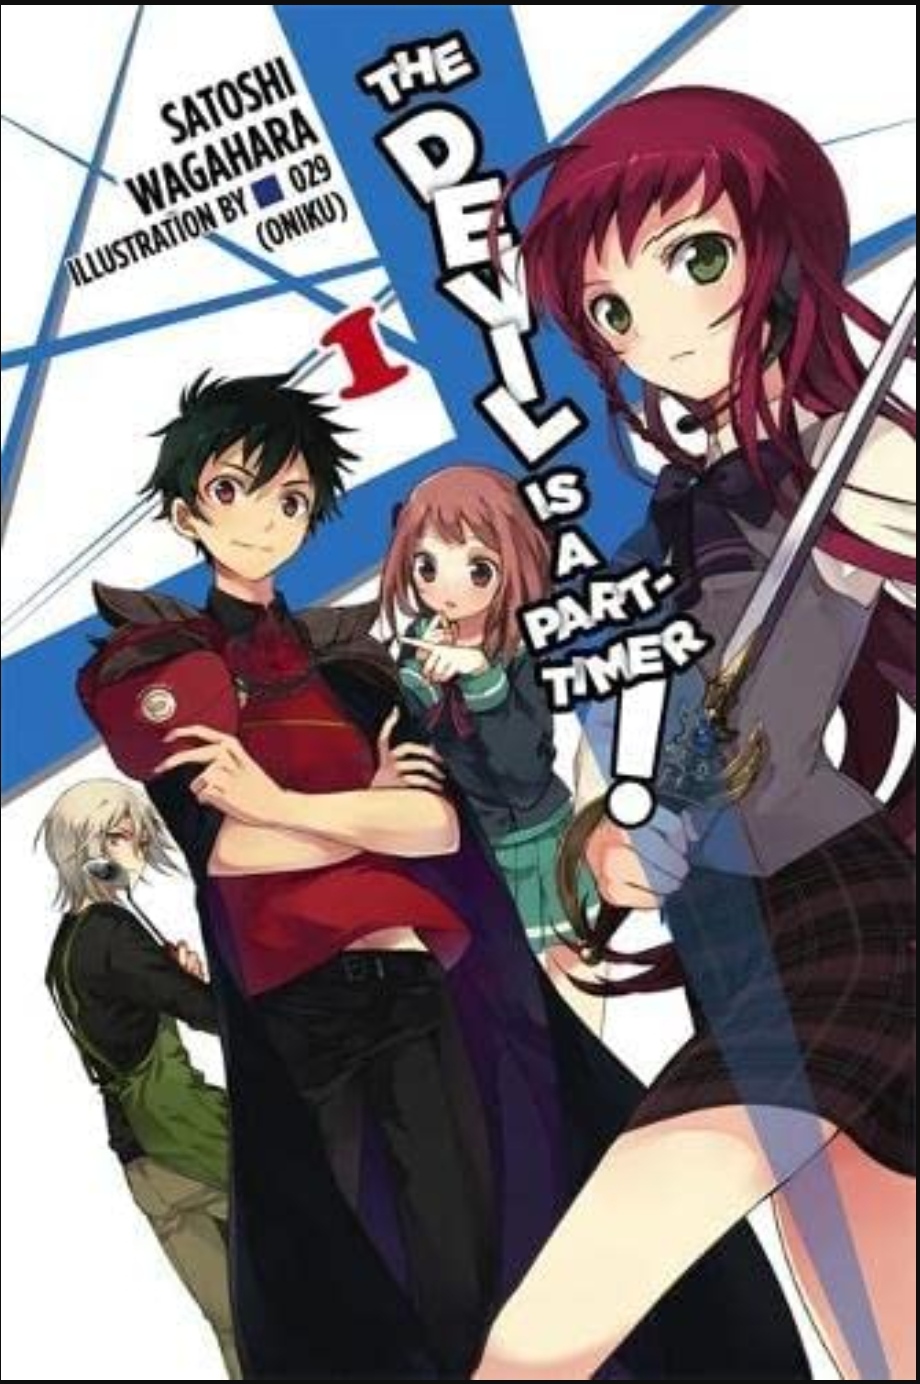 THE DEVIL IS A PART-TIMER